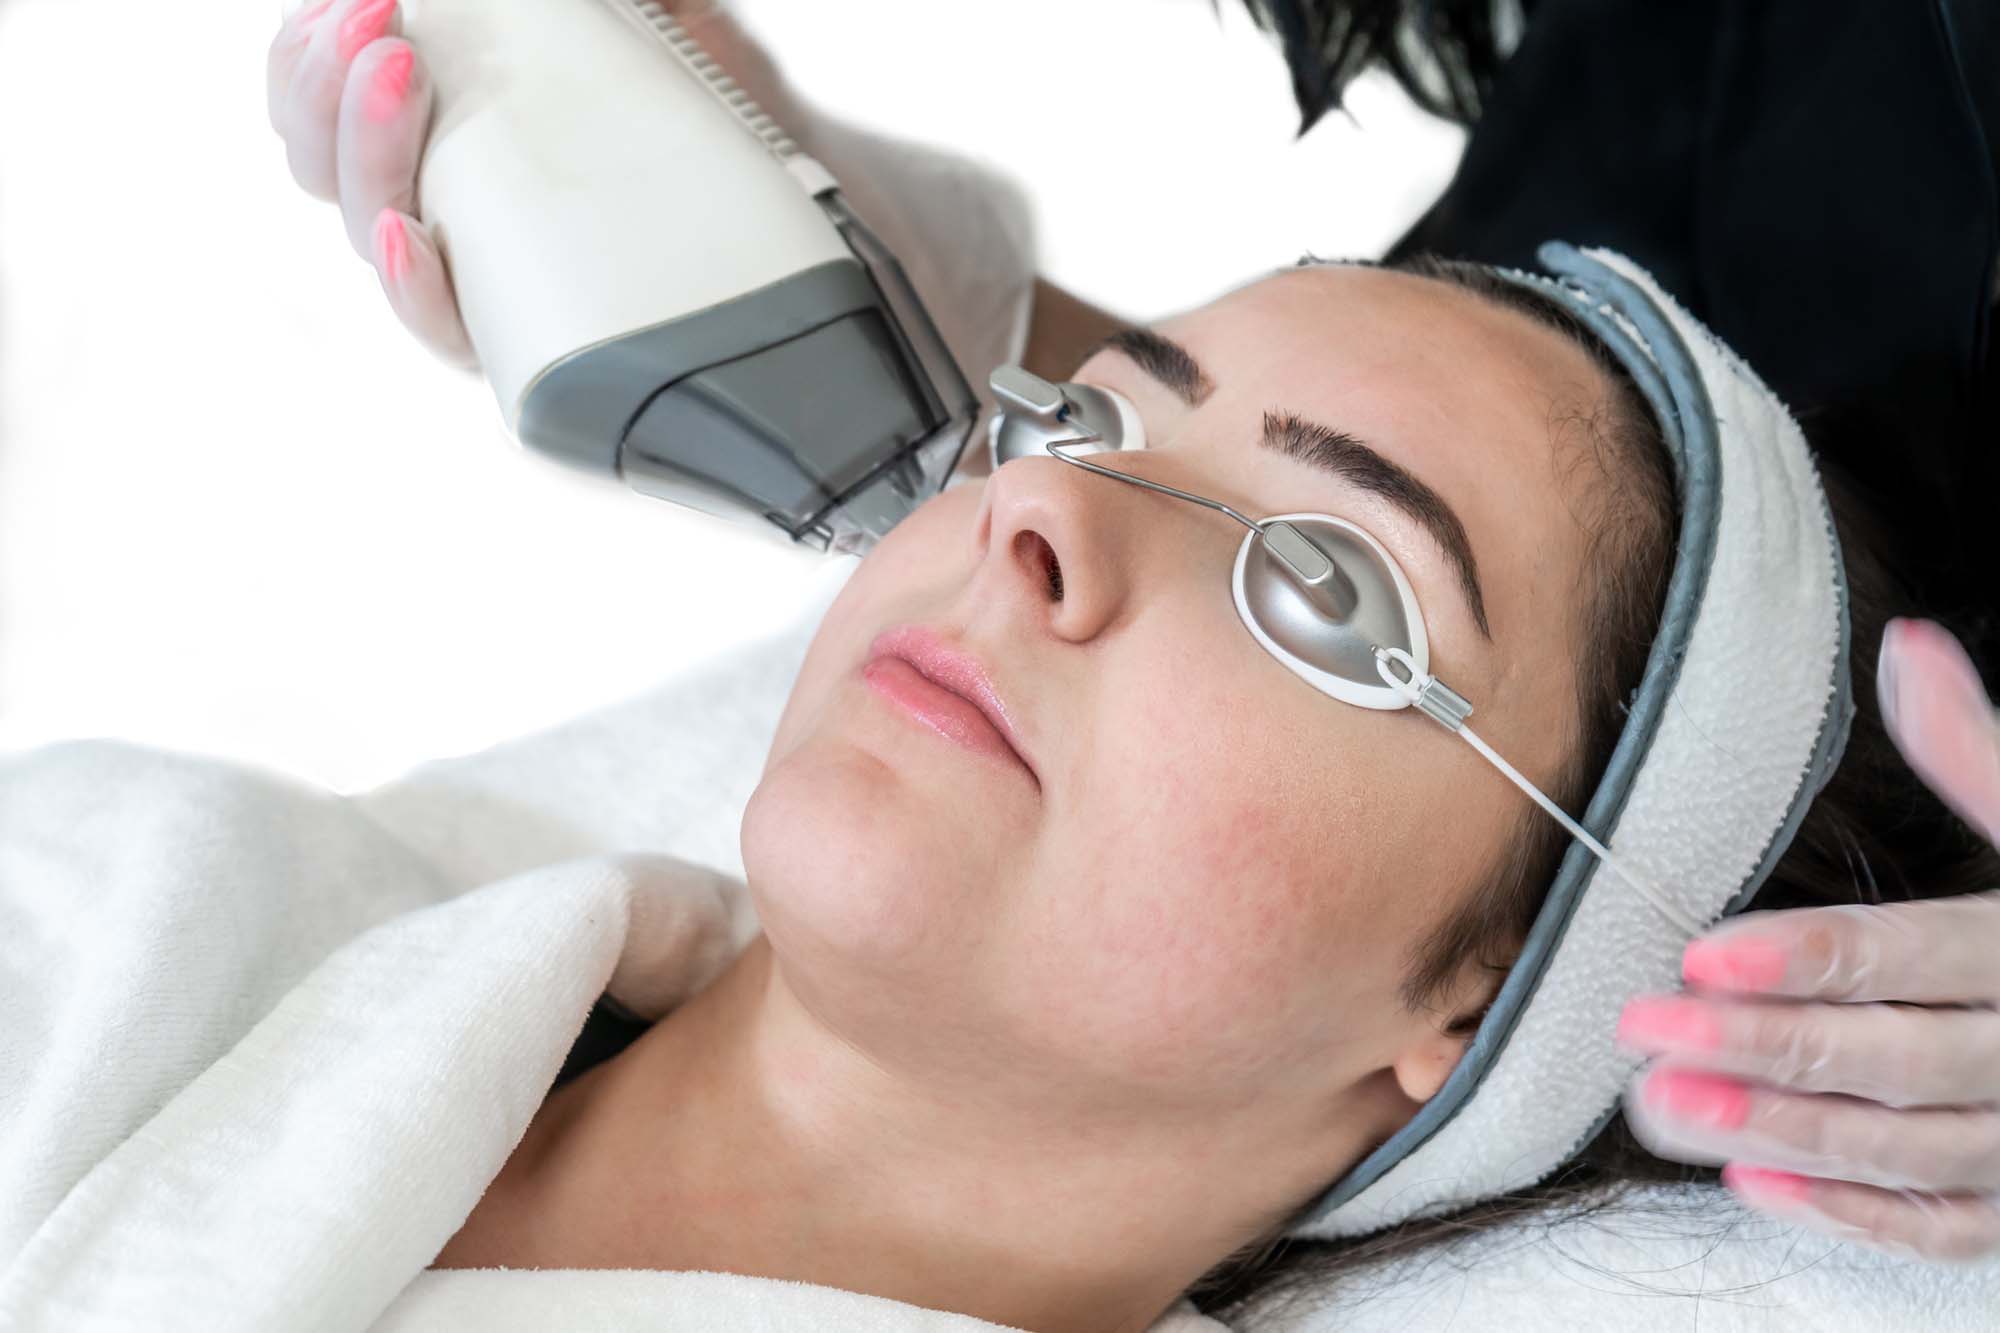 Close up of laser hand piece used for skin rejuvenation on woman's face, with beauty technician hands holding laser equipment in a medical spa. White background.